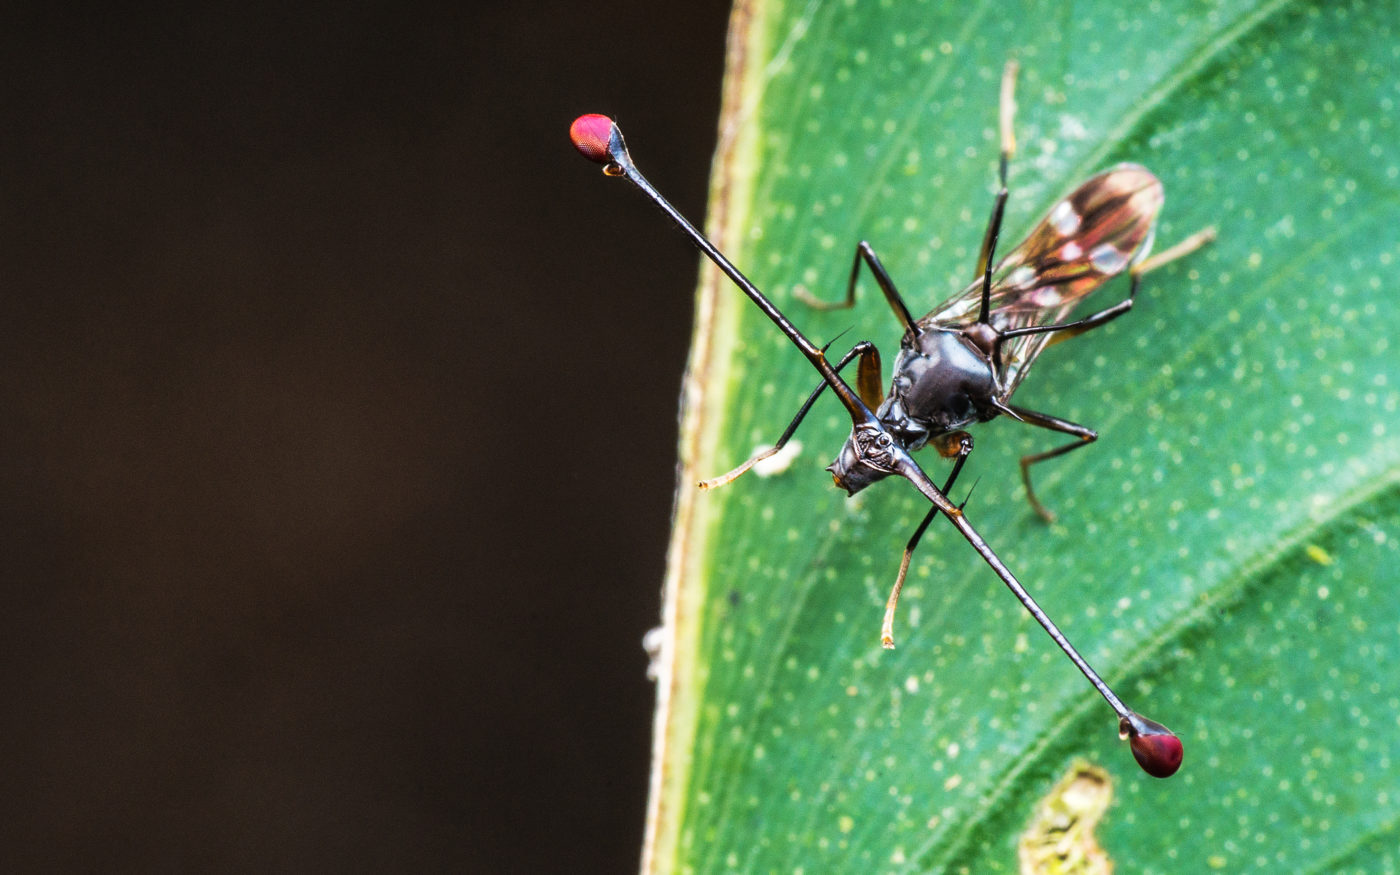 Close up image of a Stalk-eyed fly, family Diopsidae, on a leaf